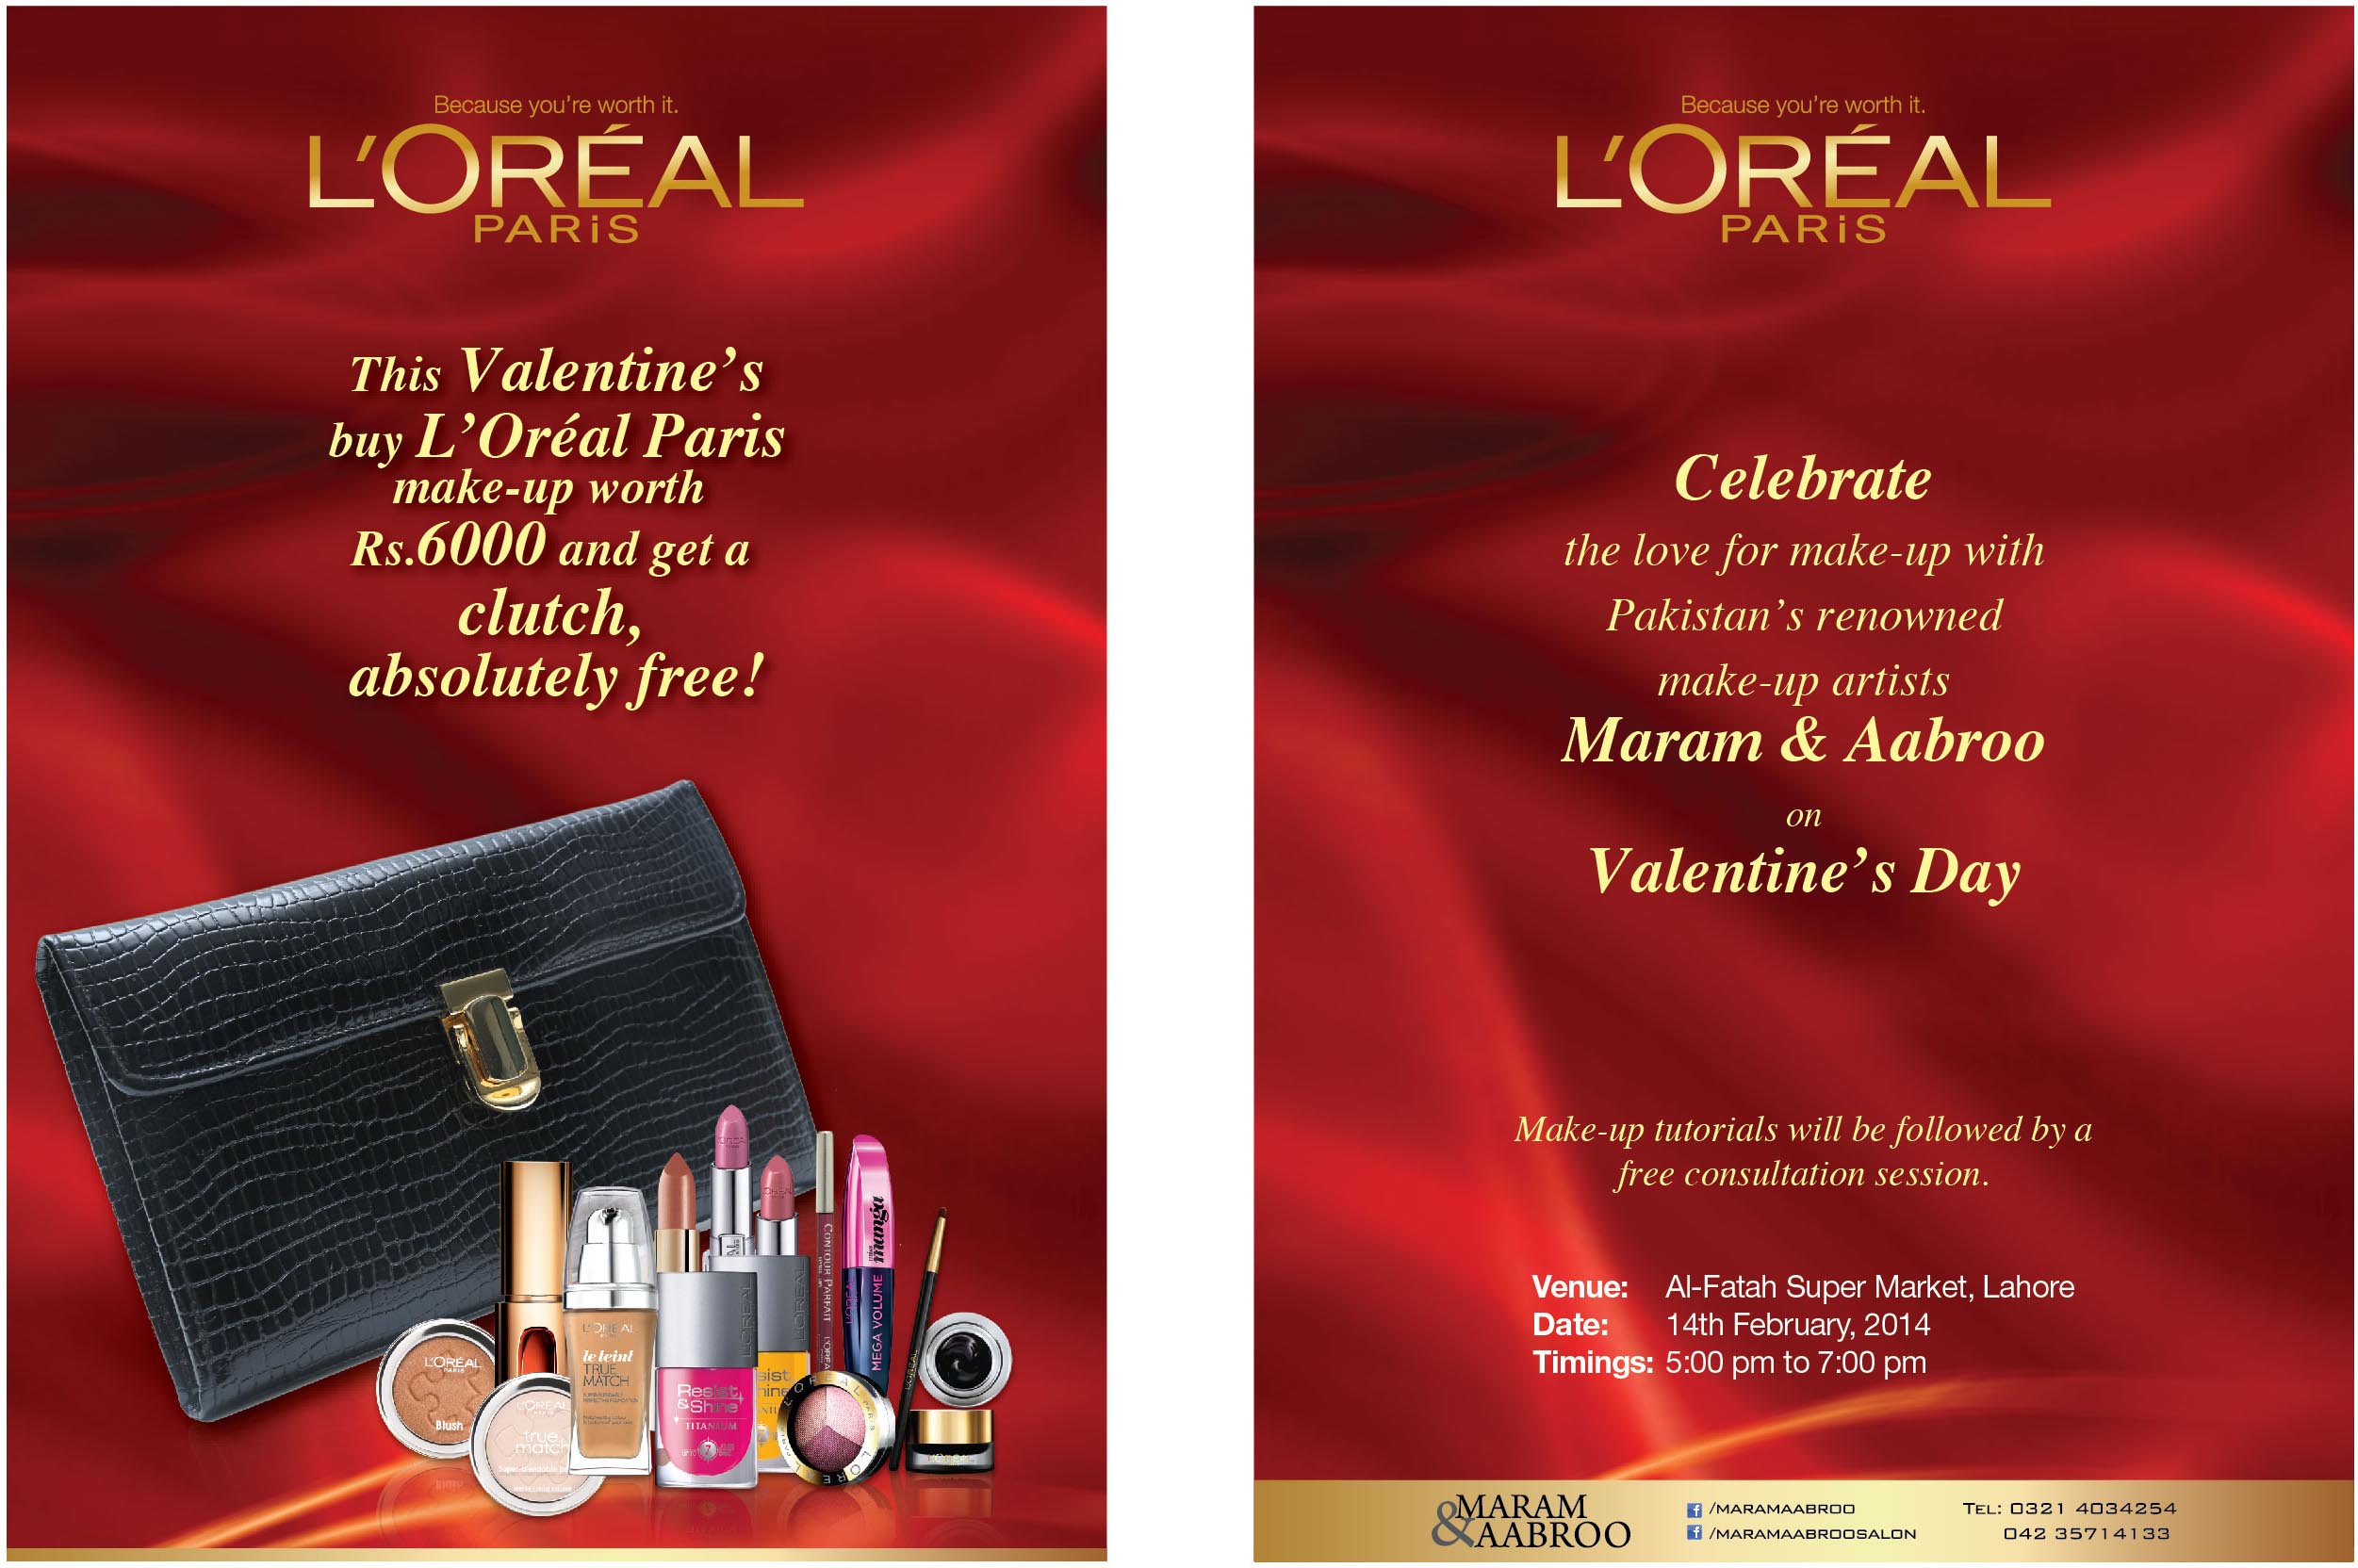 L’Oréal Paris to host Valentine’s Day Animation in Karachi and Lahore!